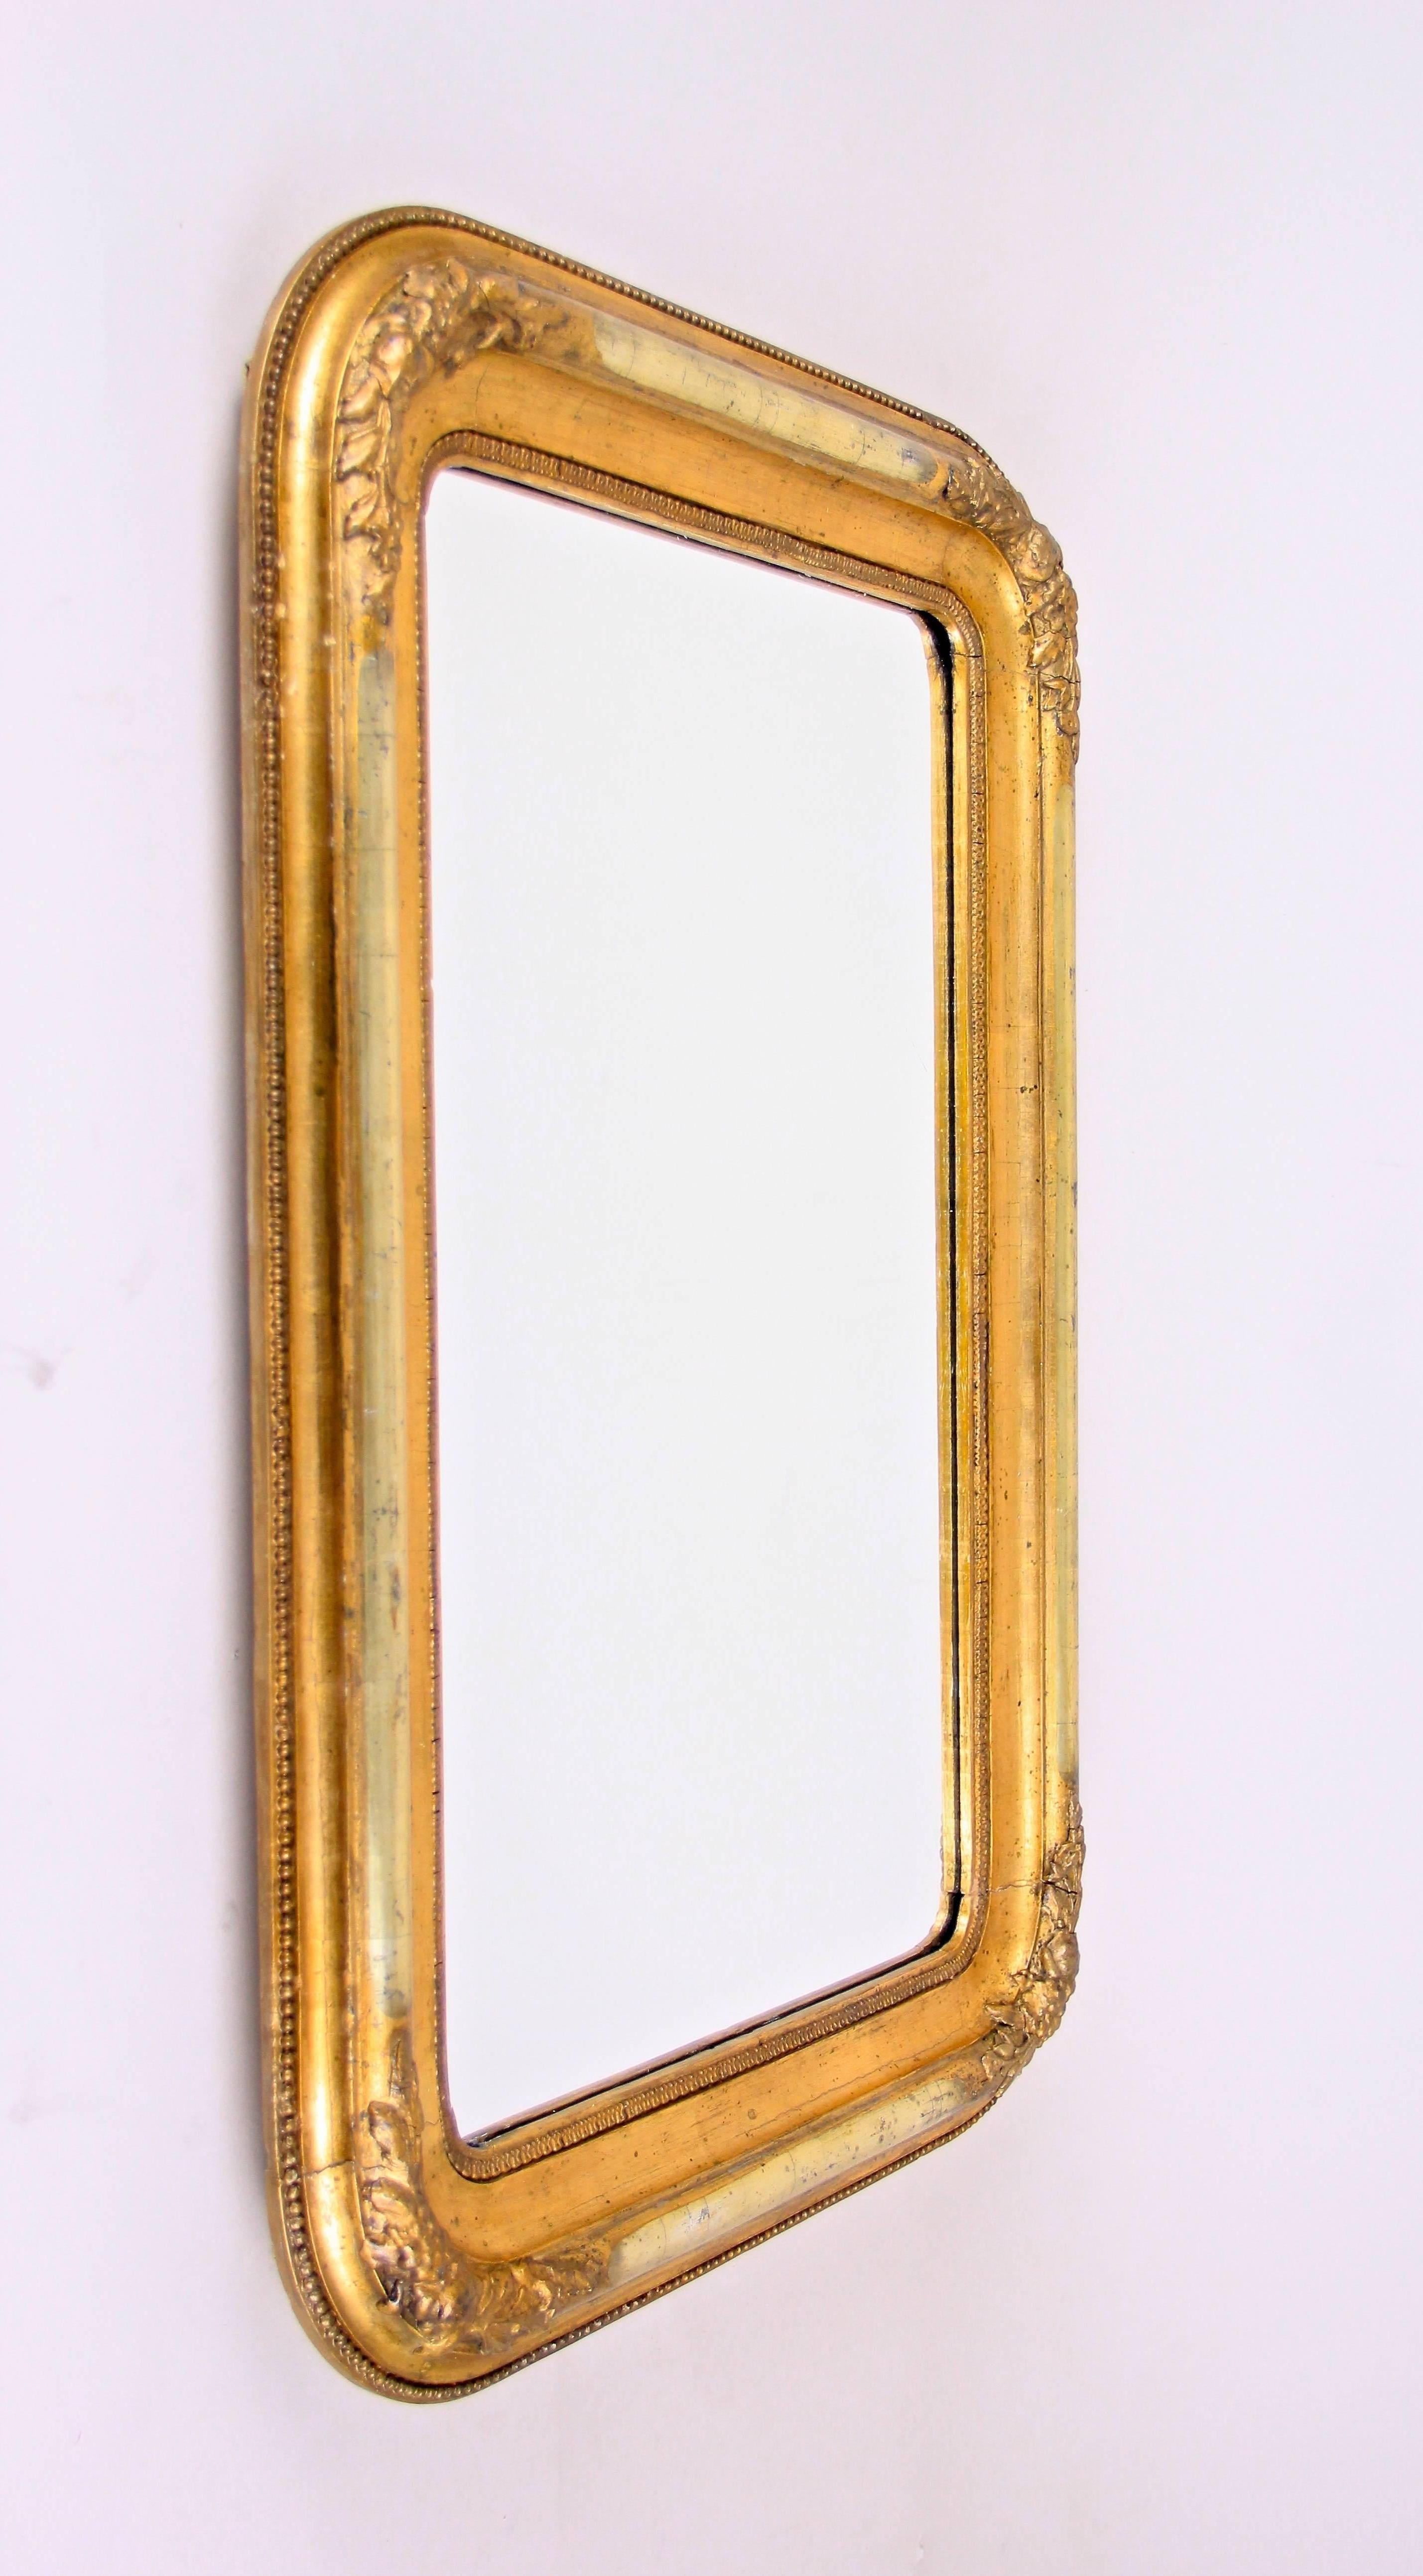 Exclusive gilt Biedermeier wall mirror with silvered half rods from the period circa 1840 in Austria. Impressing with beautiful floral stucco works, silver plated half rods and rounded corners, this precious frame was restored by our experts with